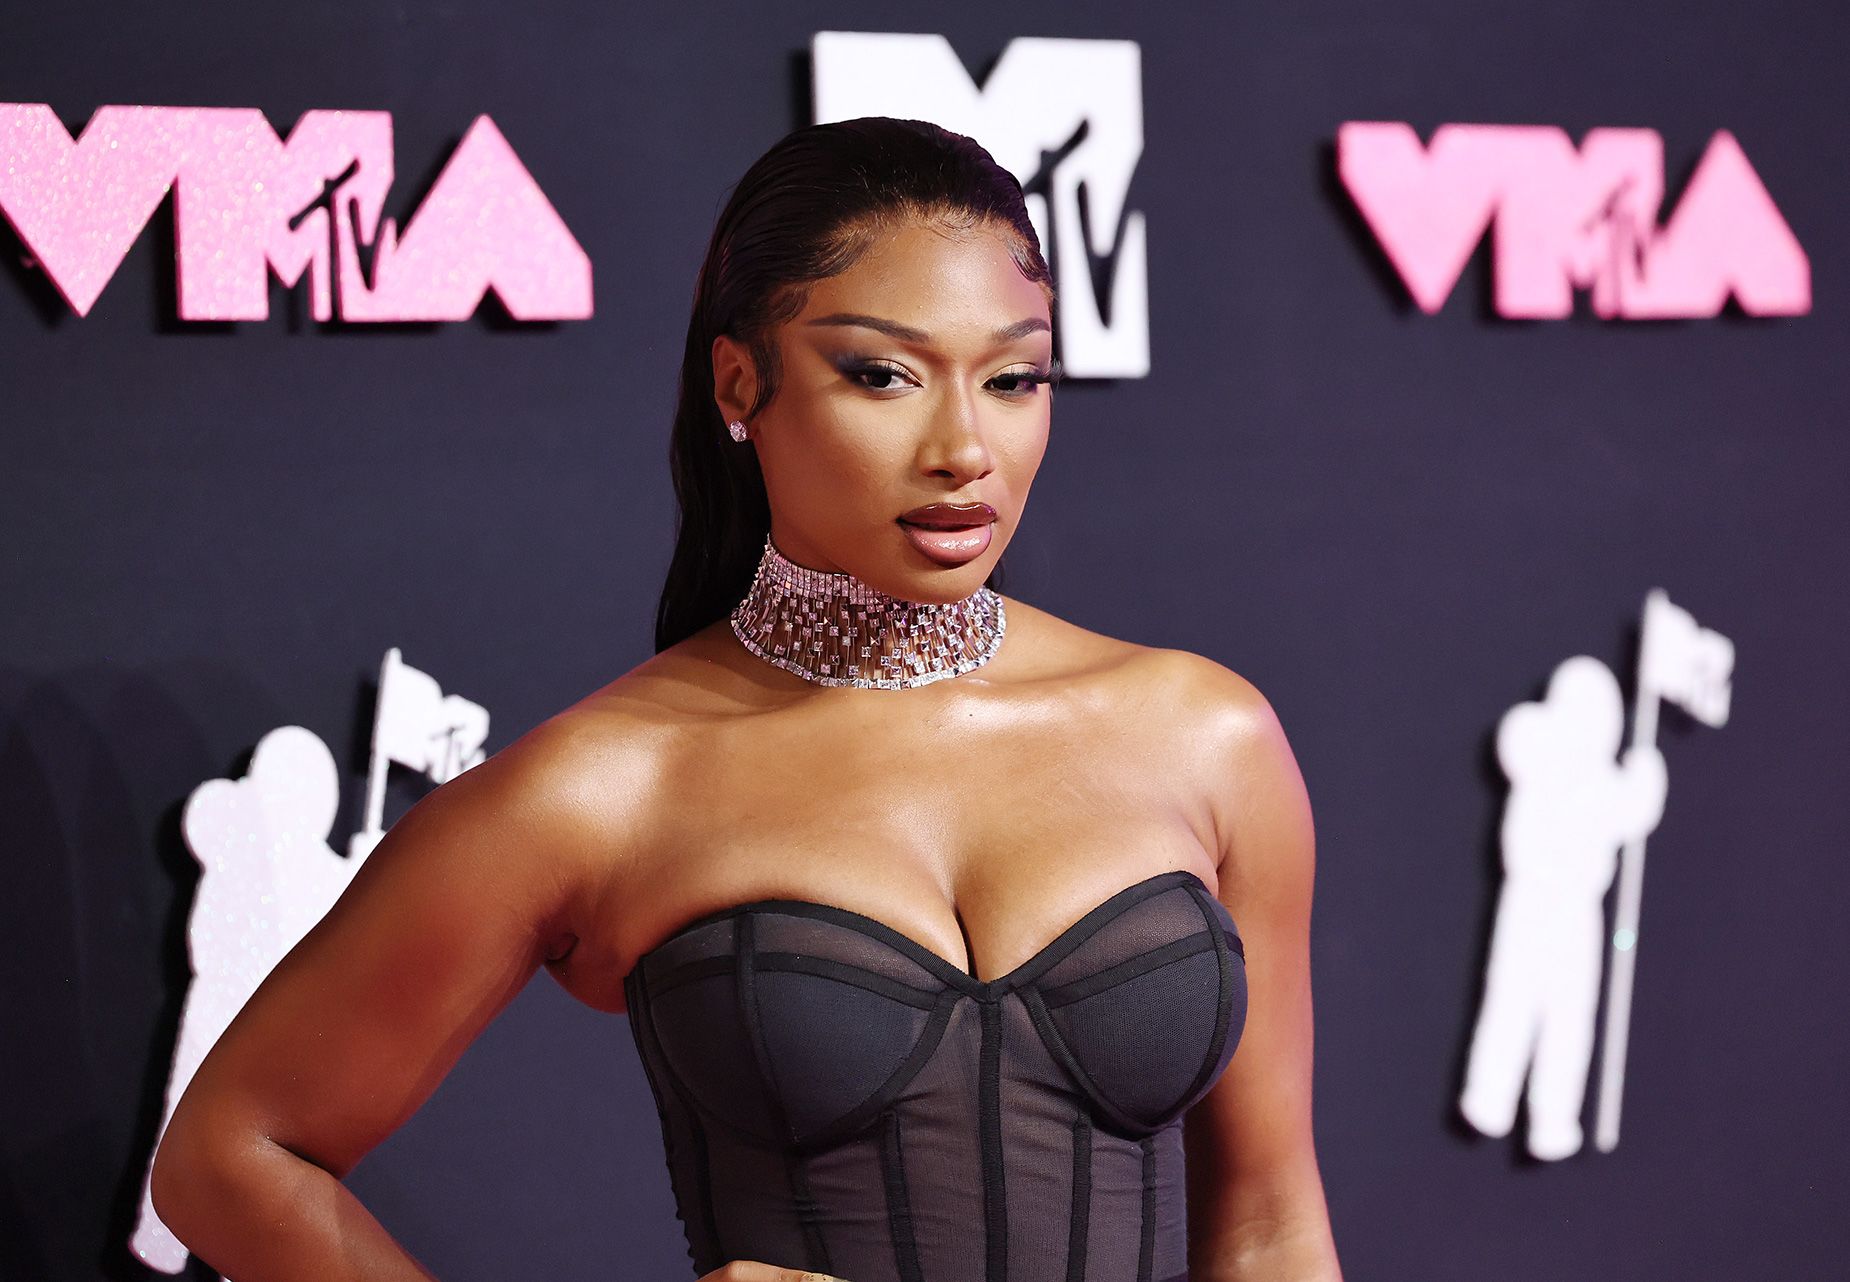 Megan Thee Stallion urges people to check on their friends